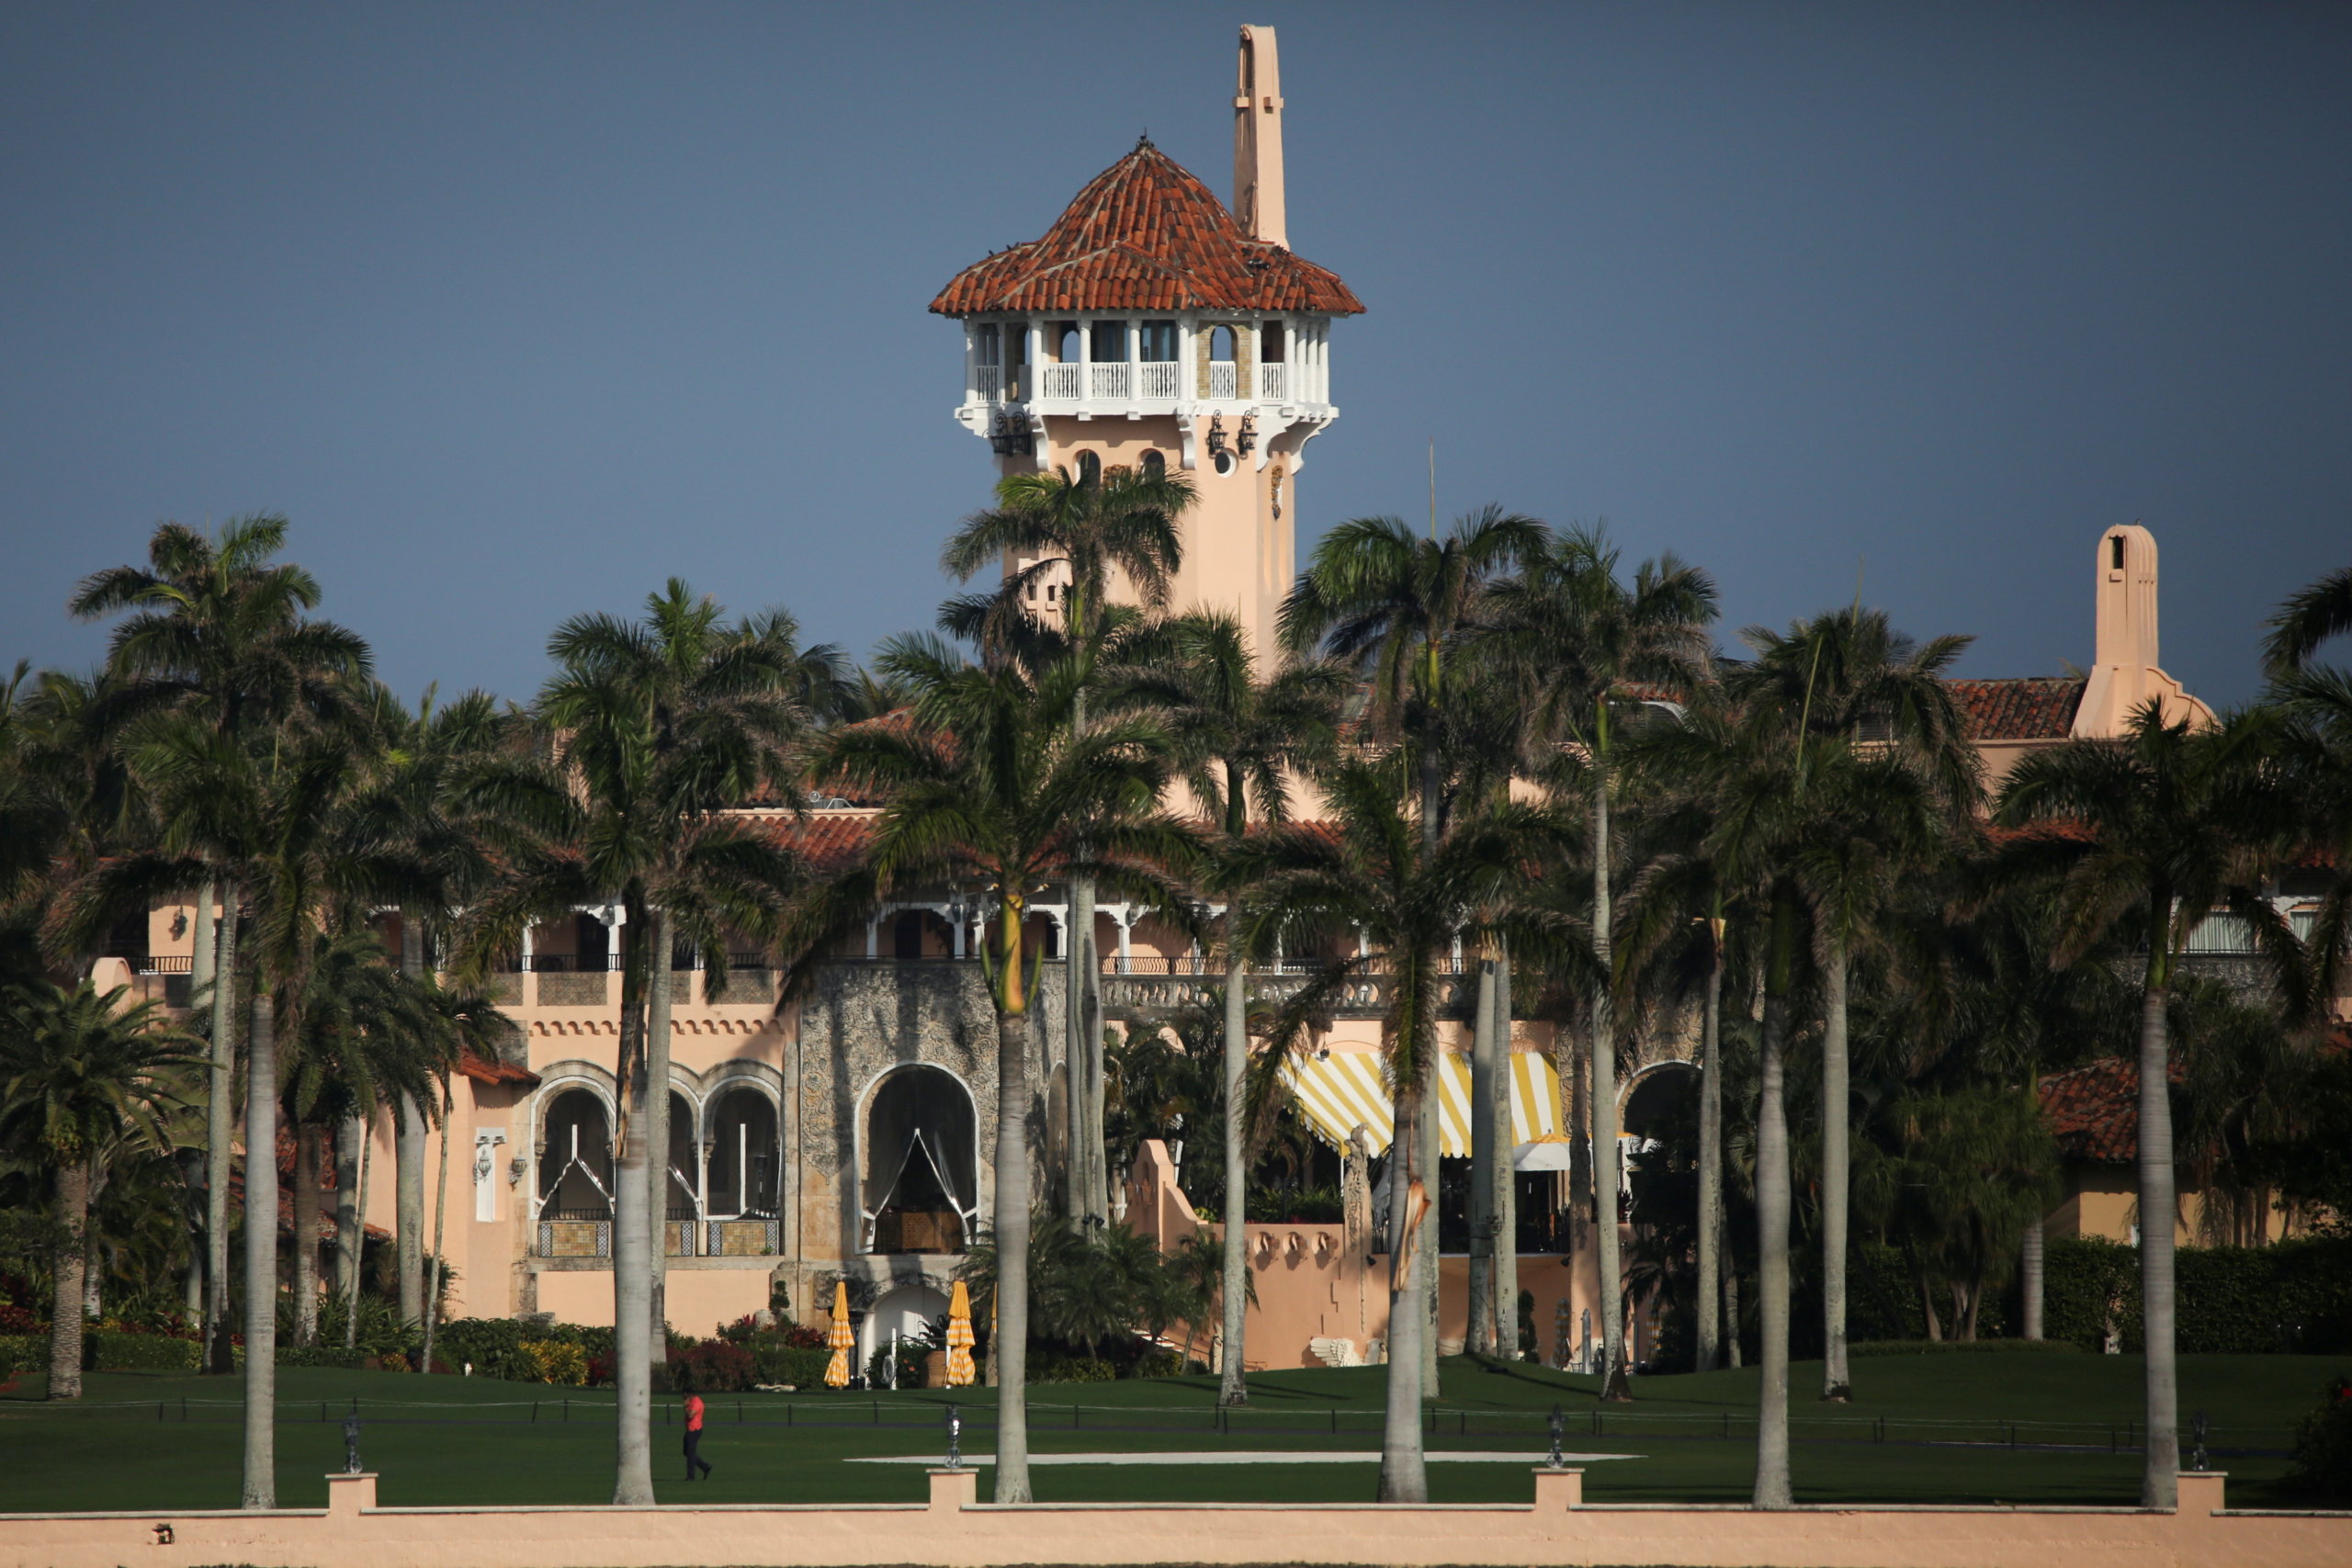 Is Mar-a-Lago worth $1 billion? Trump's winter home valuations are